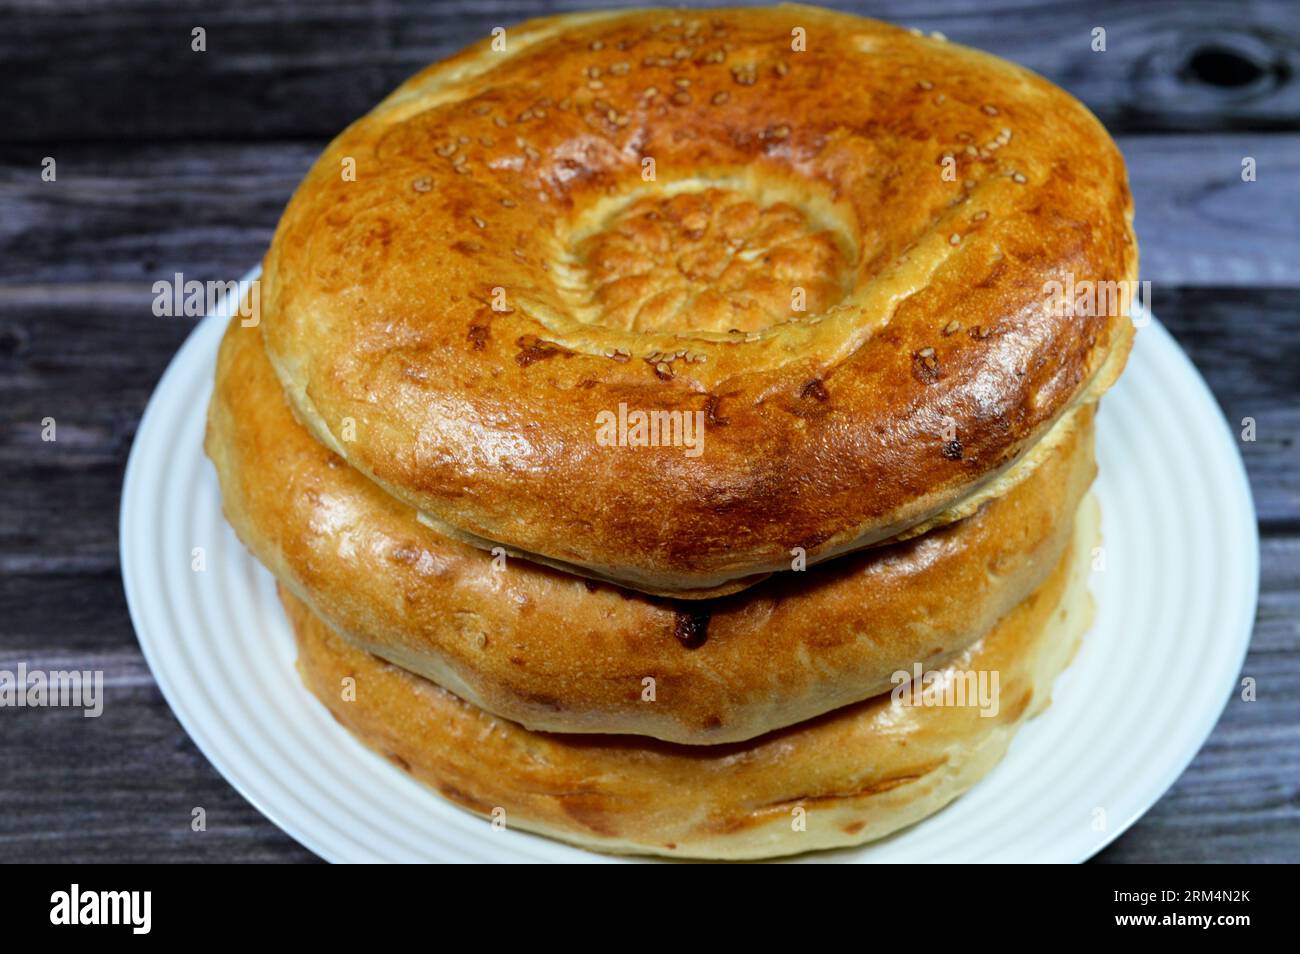 Tandyr nan Uzbek bread, a type of Central Asian bread, often decorated by stamping patterns on the dough by using a bread stamp known as a chekich, al Stock Photo